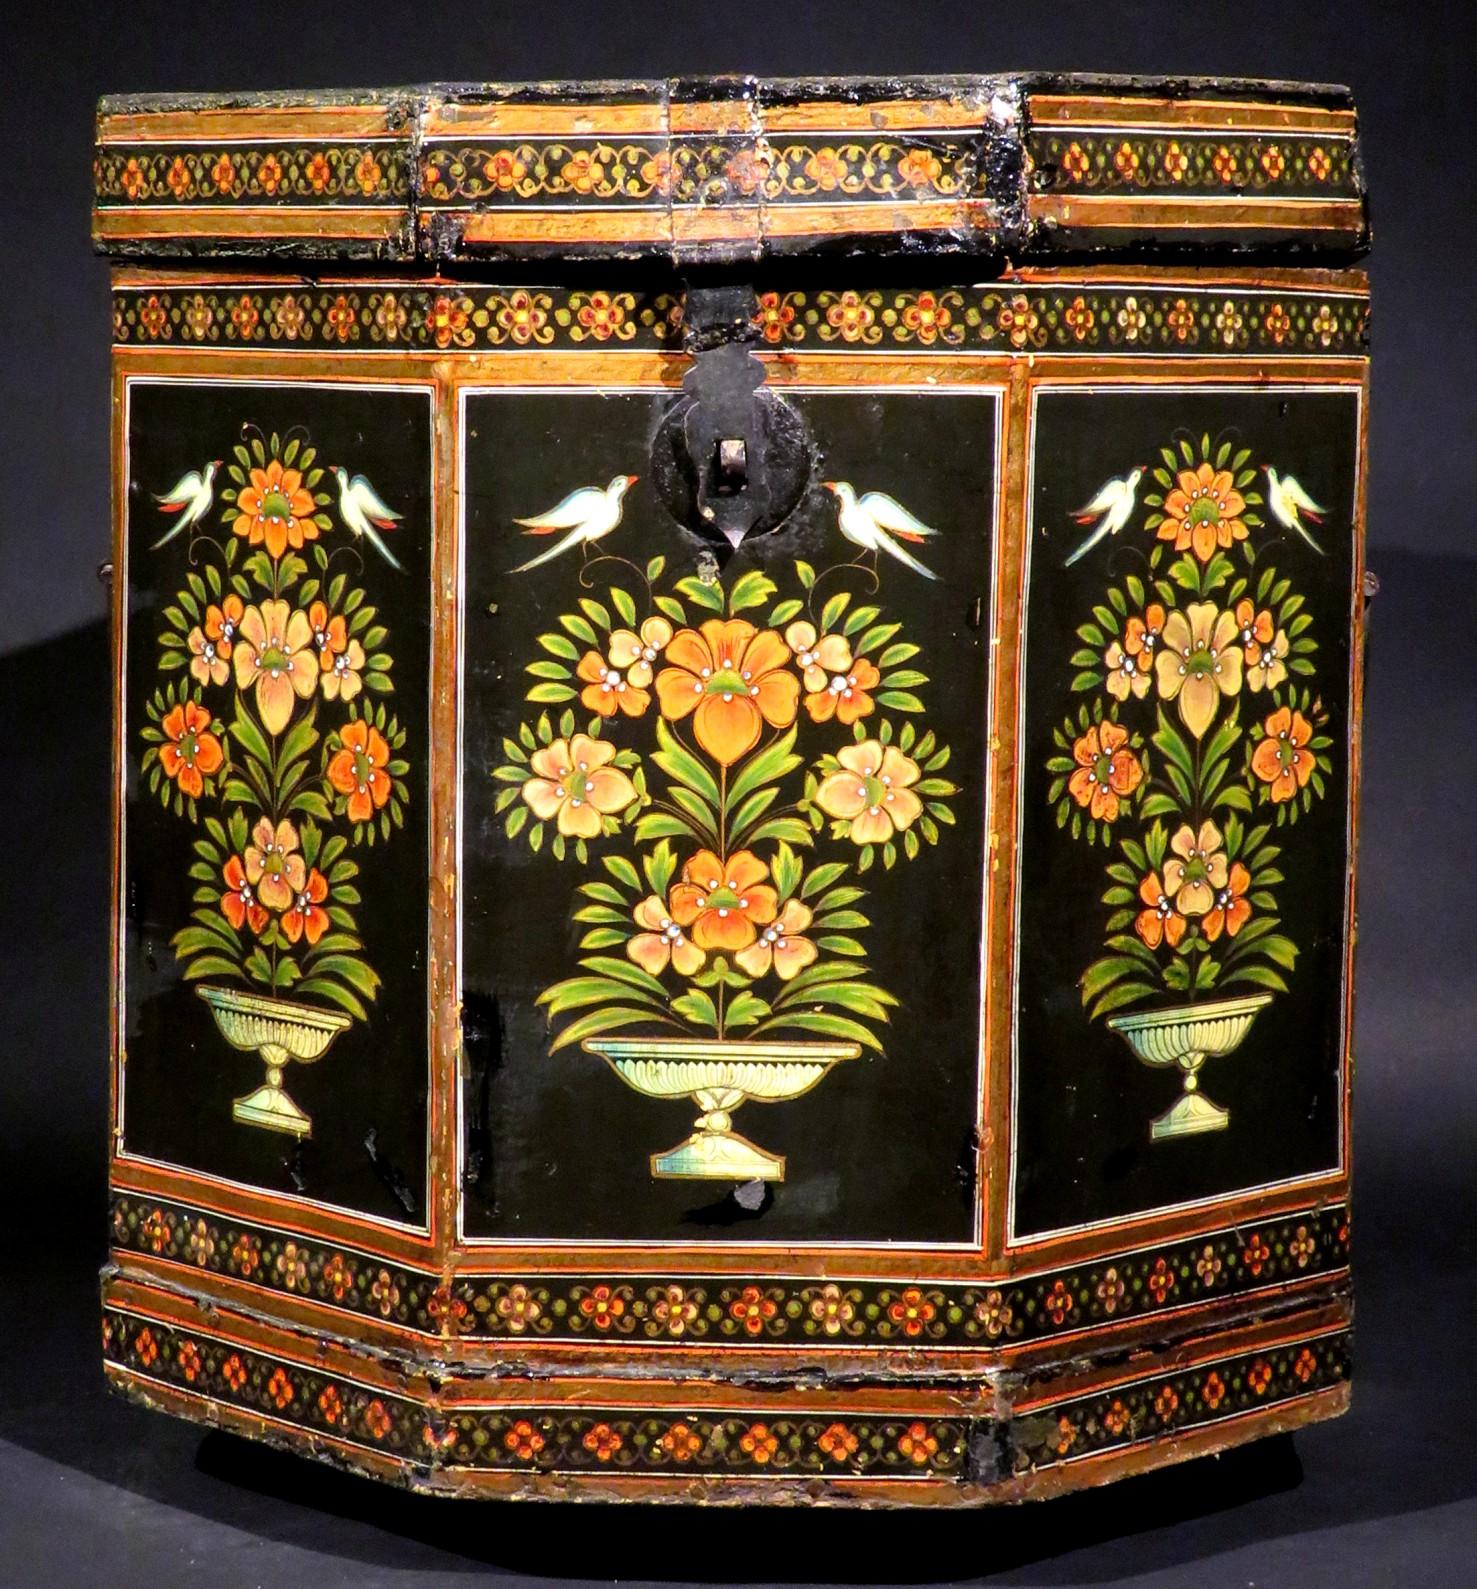 A highly decorative & rare 19th century Anglo Indian papier mache campaign cellarette, likely made in Kashmir for a British military officer posted in India during the days of the Raj.  
The octagonal shaped, black lacquered papier mache case